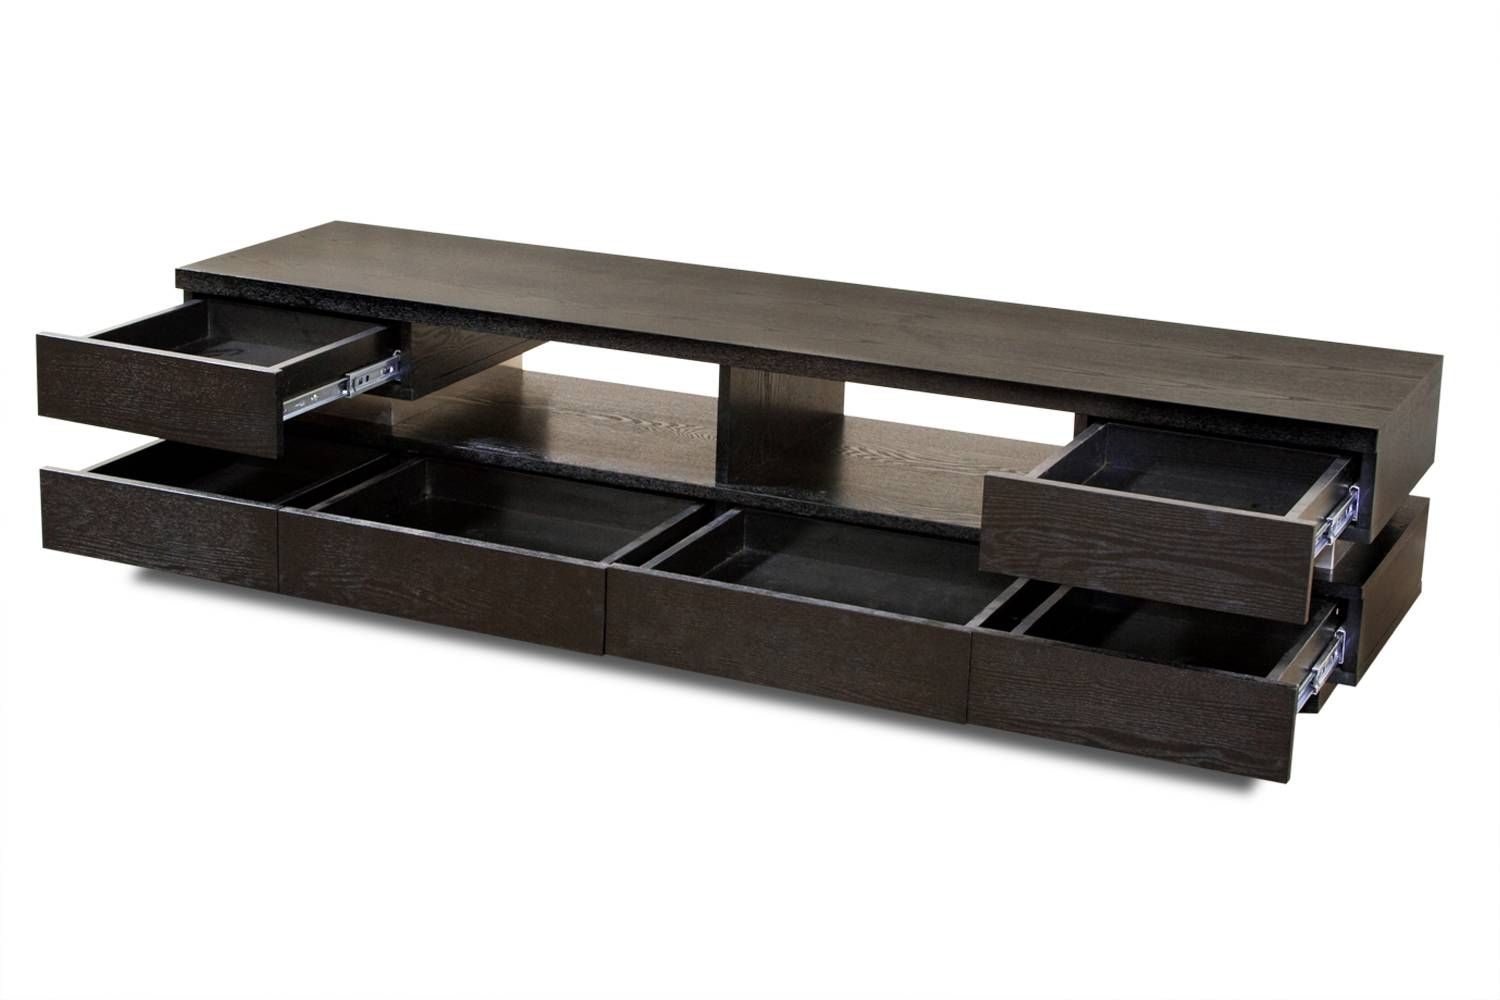 Custom Low Profile Tv Console Design With Drawer And Storage For Throughout Low Profile Contemporary Tv Stands (View 13 of 15)